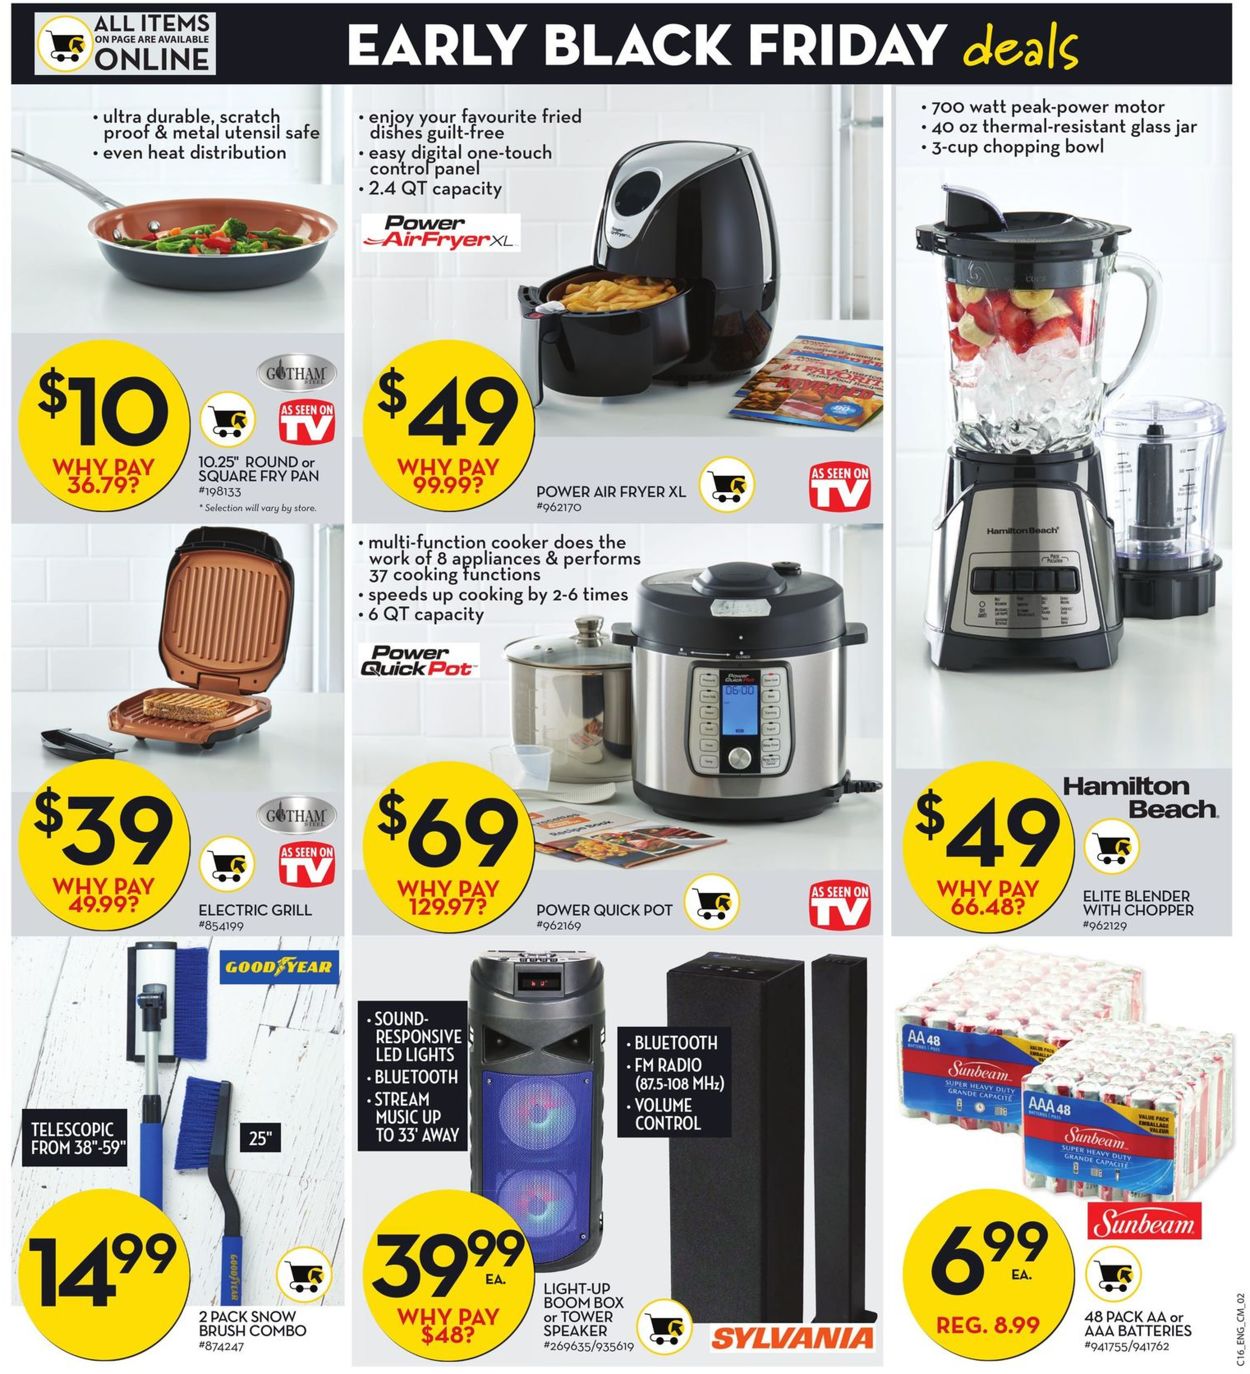 Giant Tiger EARLY BLACK FRIDAY DEALS 2019 Flyer - 11/20-11/26/2019 (Page 6)